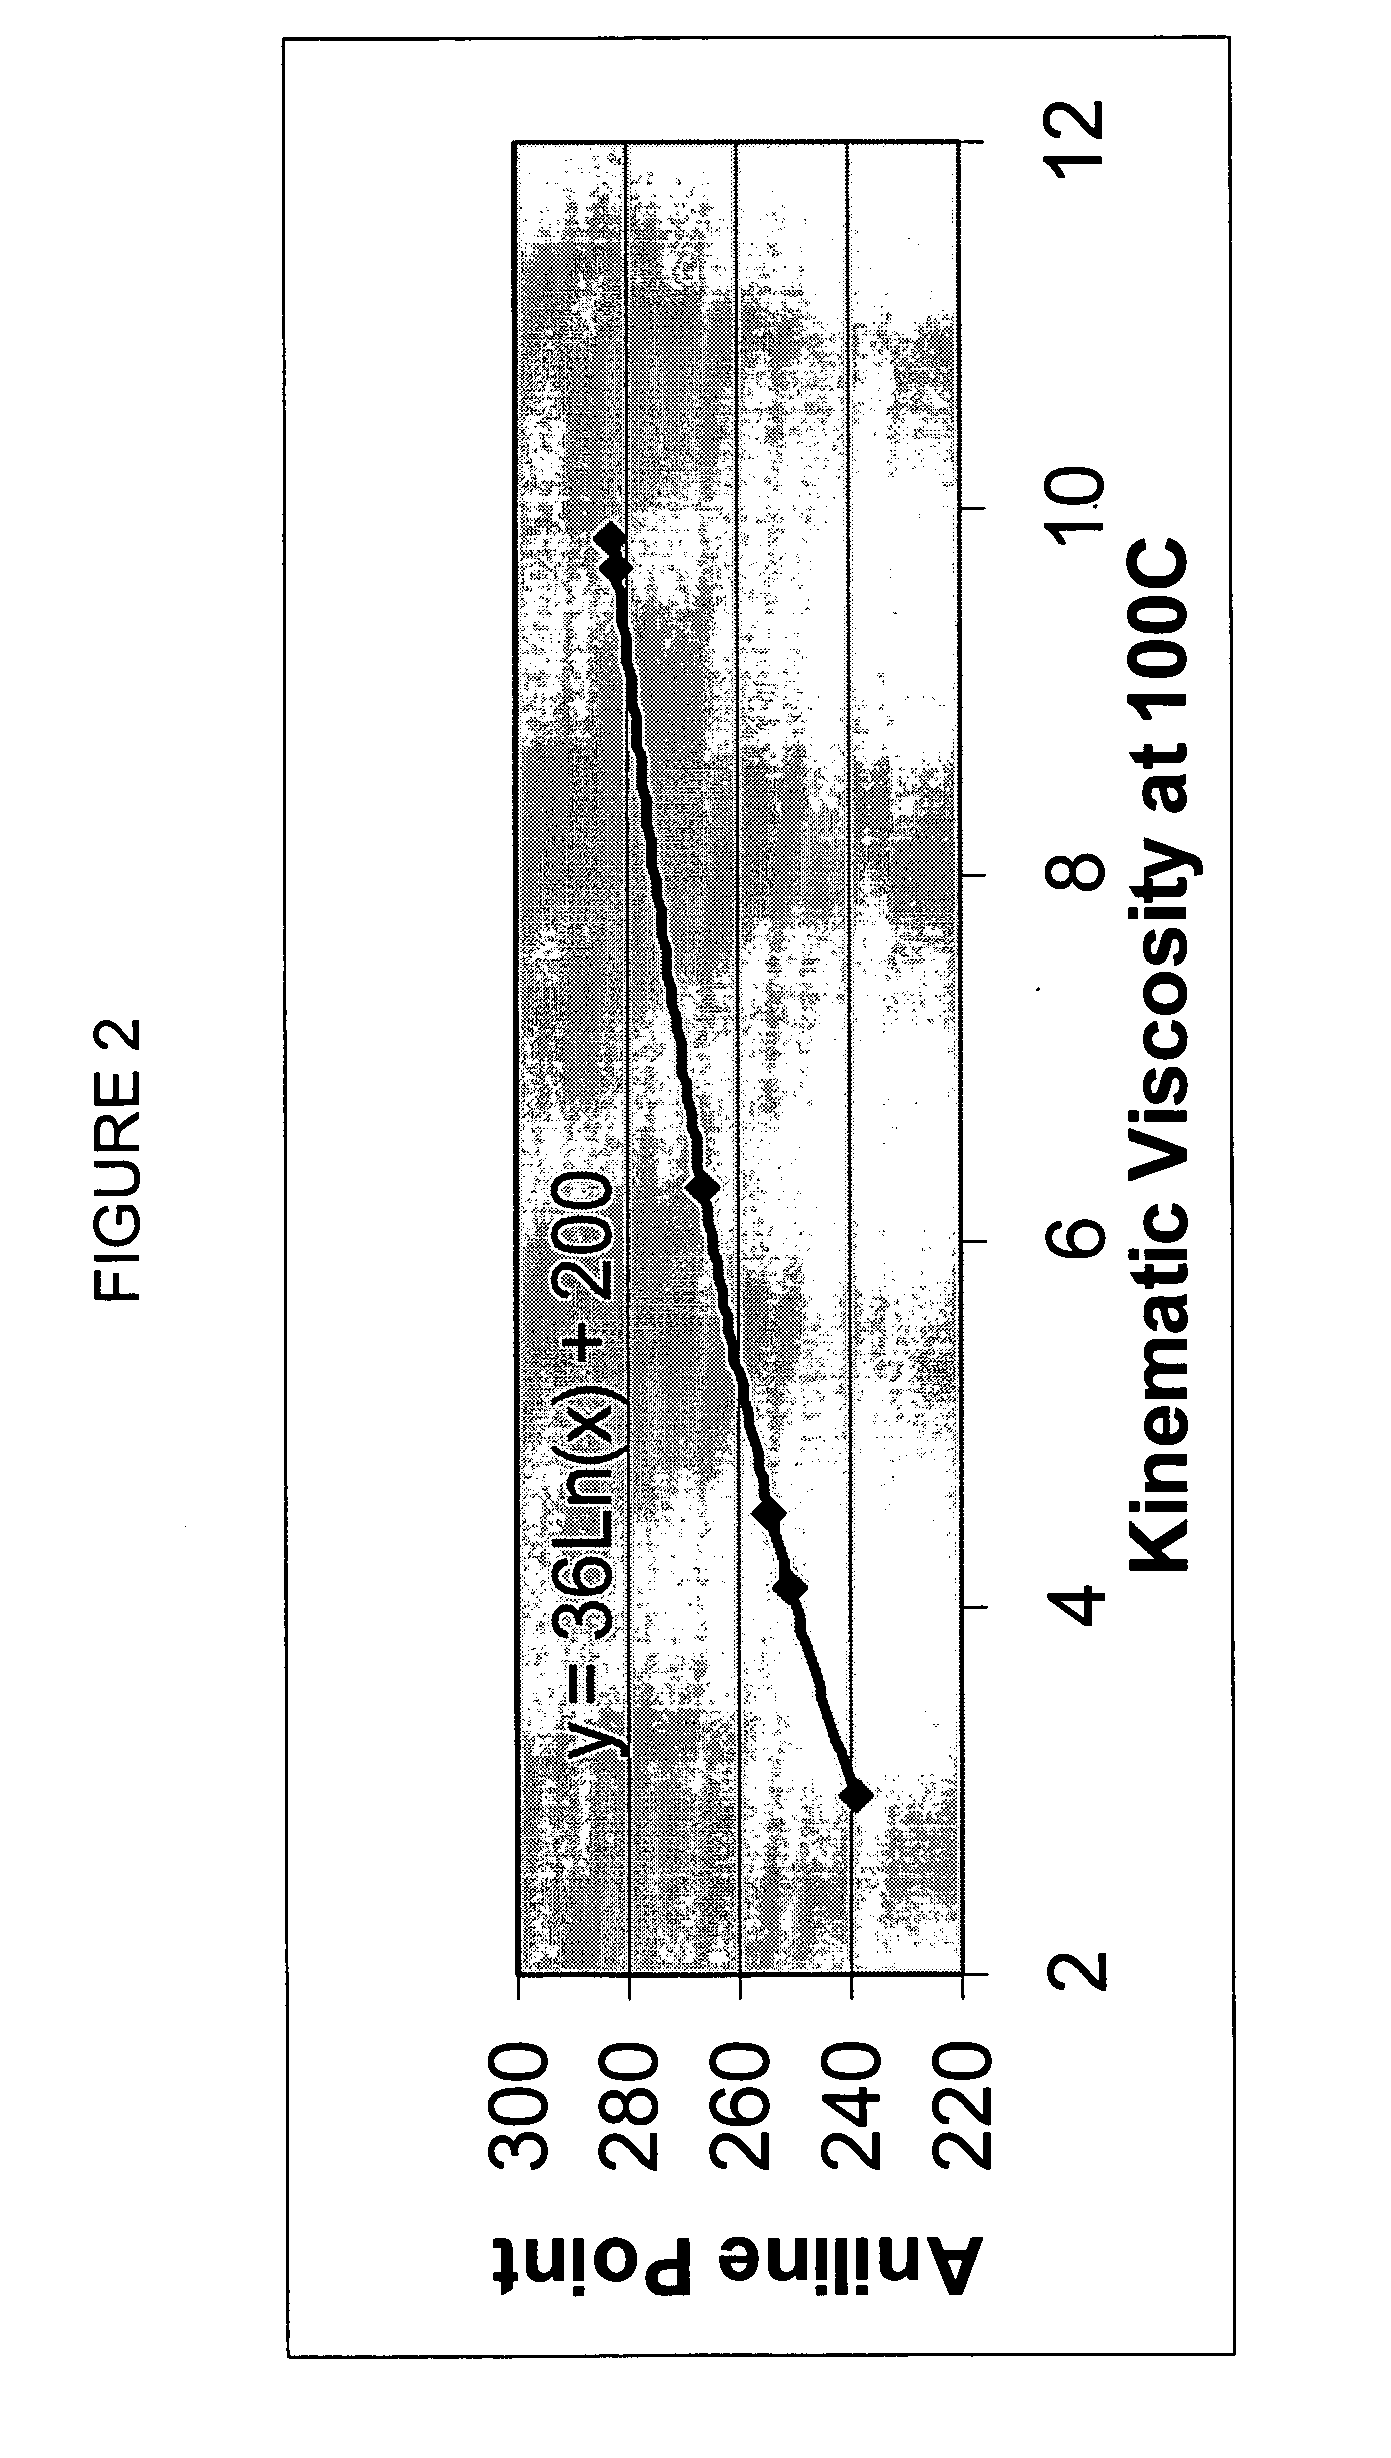 Process for manufacturing lubricating base oil with high monocycloparaffins and low multicycloparaffins